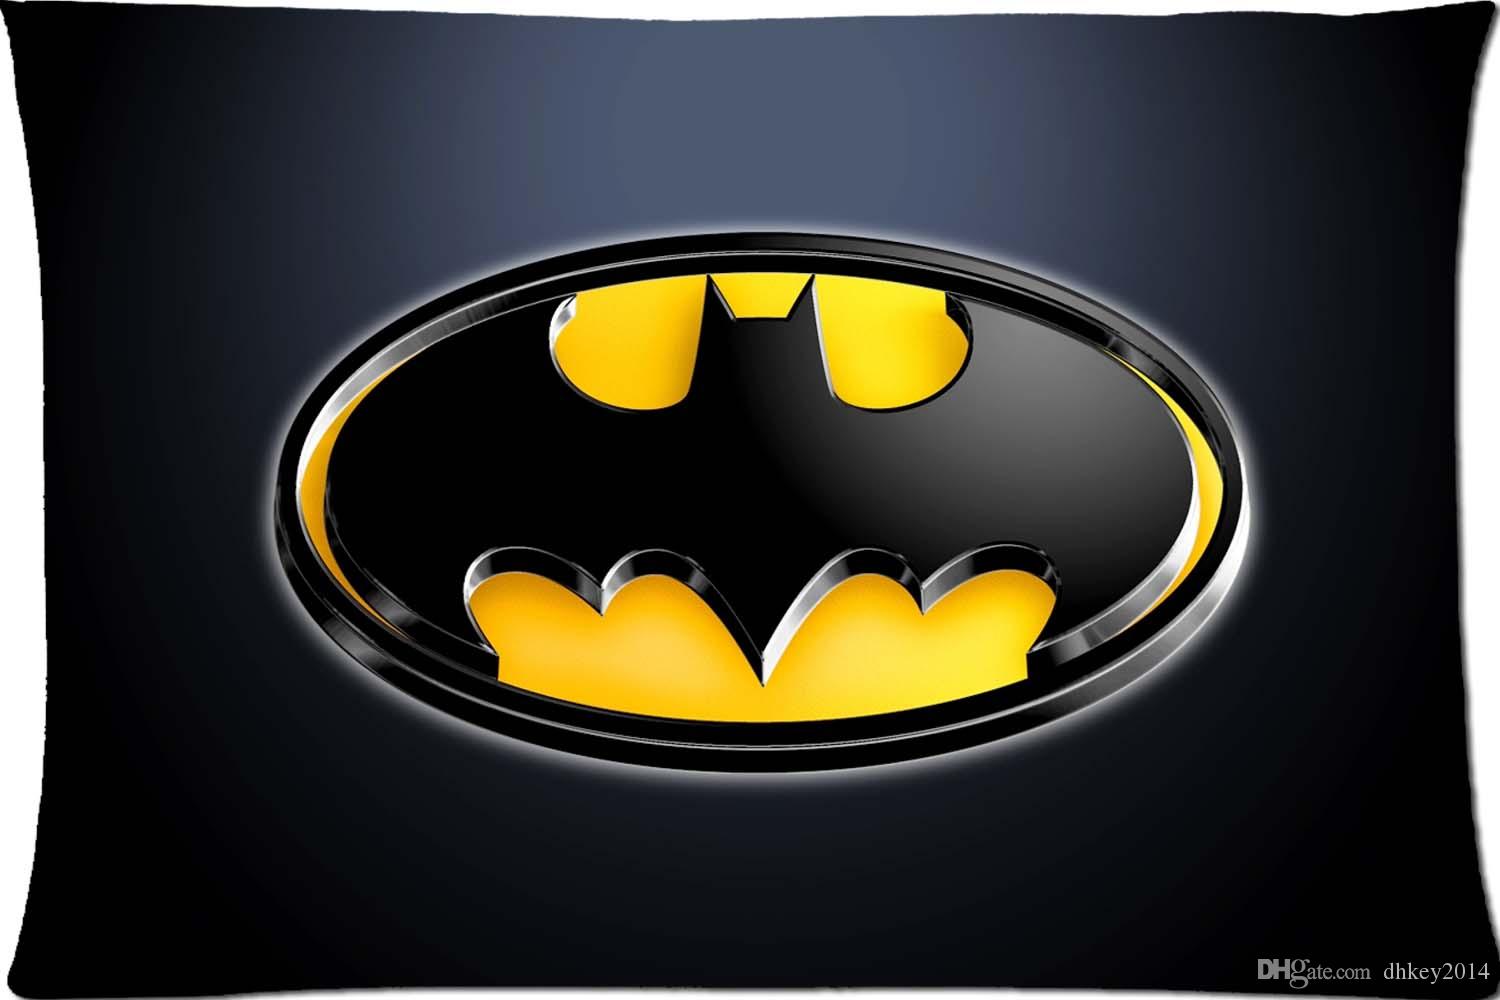 Batman Logo Cool Pattern Custom Pillowcase Cover Two Side Picture Size  20x30 Inch Travel Neck Pillow Pillowcase Pattern From Dhkey2014, $13.28.